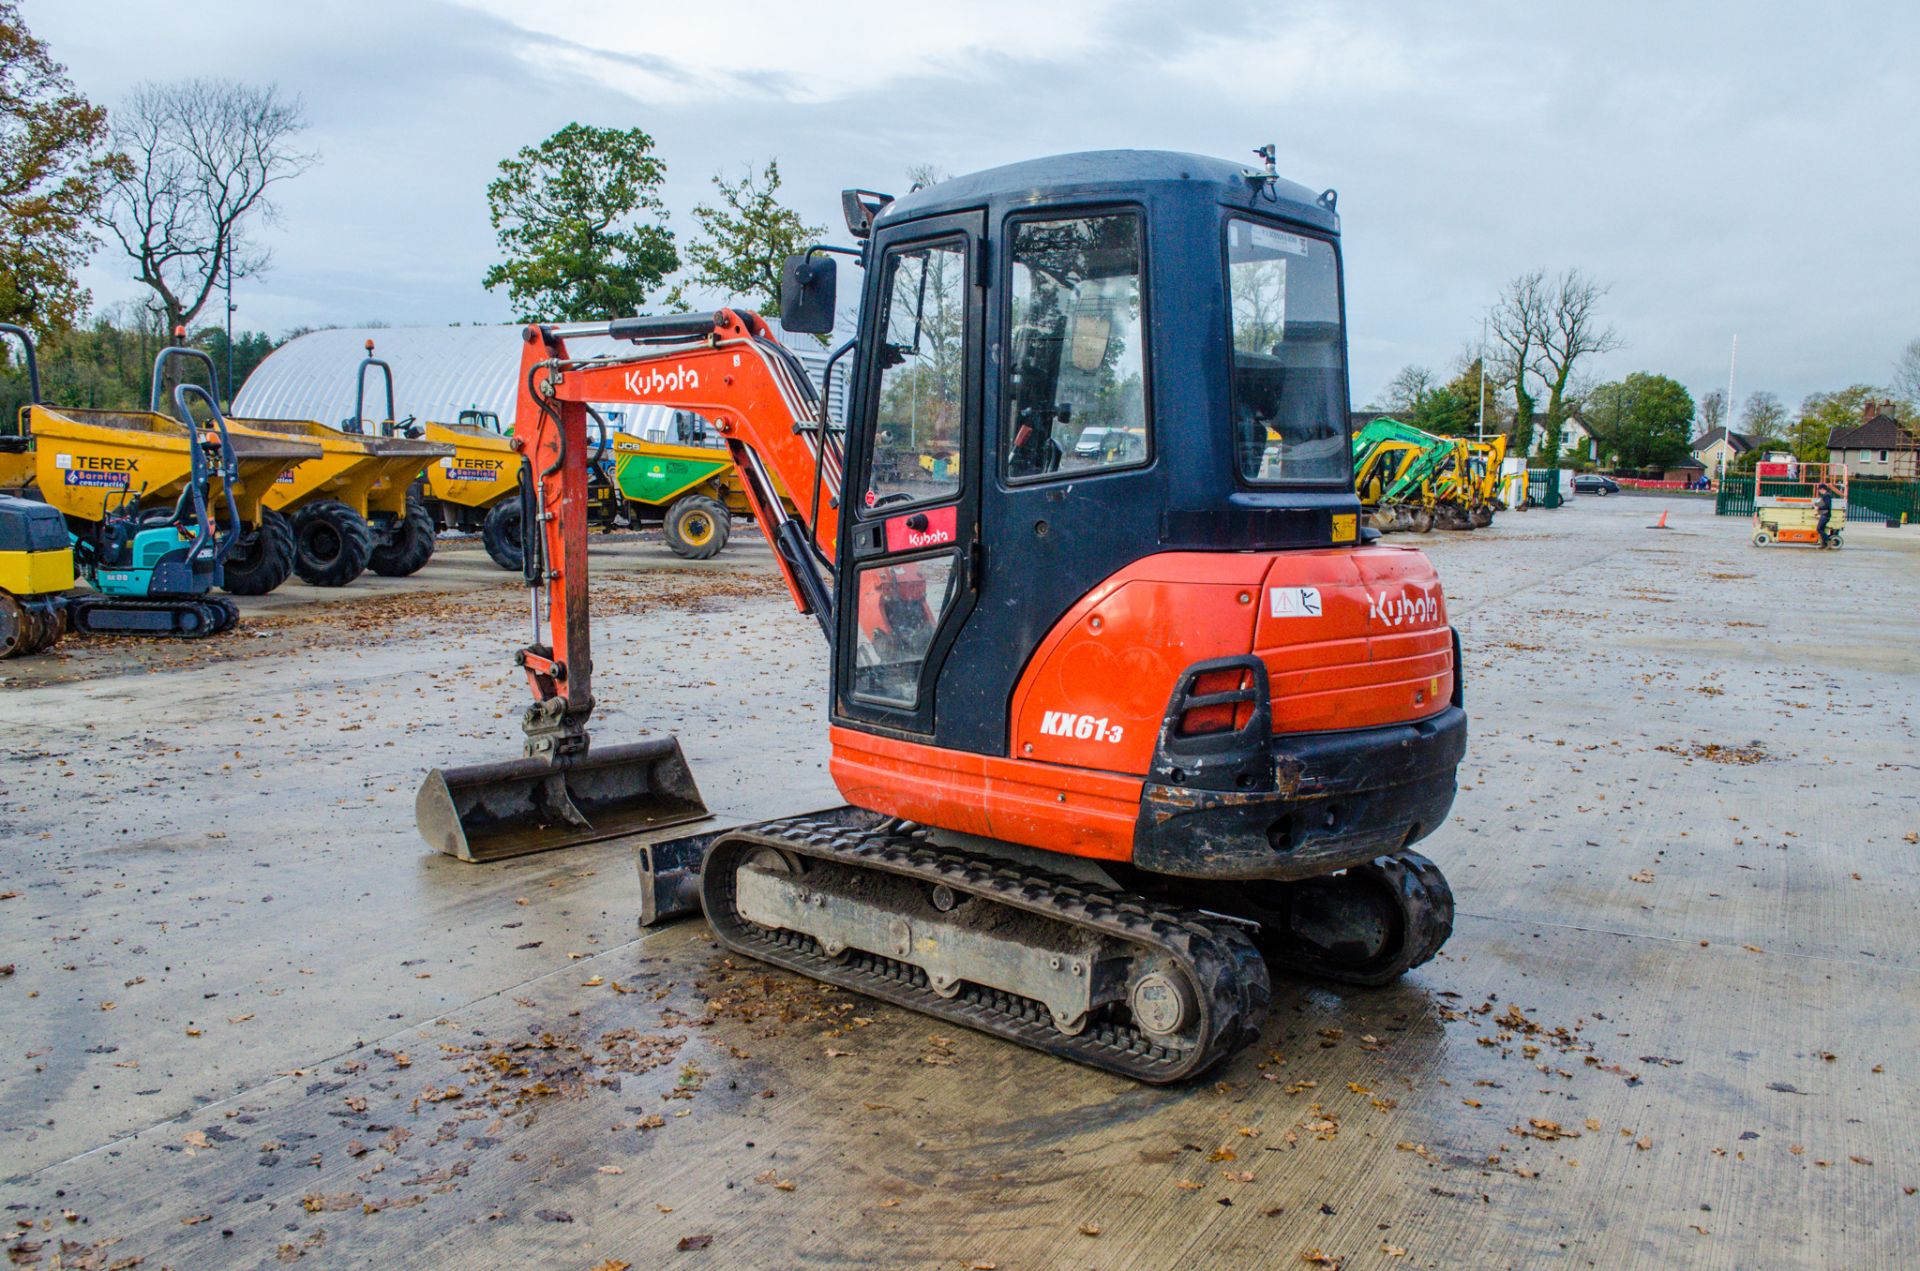 Kubota KX61-3 2.6 tonne rubber tracked excavator Year: 2015 S/N: 81787 Recorded Hours: 2860 EXC149 - Image 4 of 18